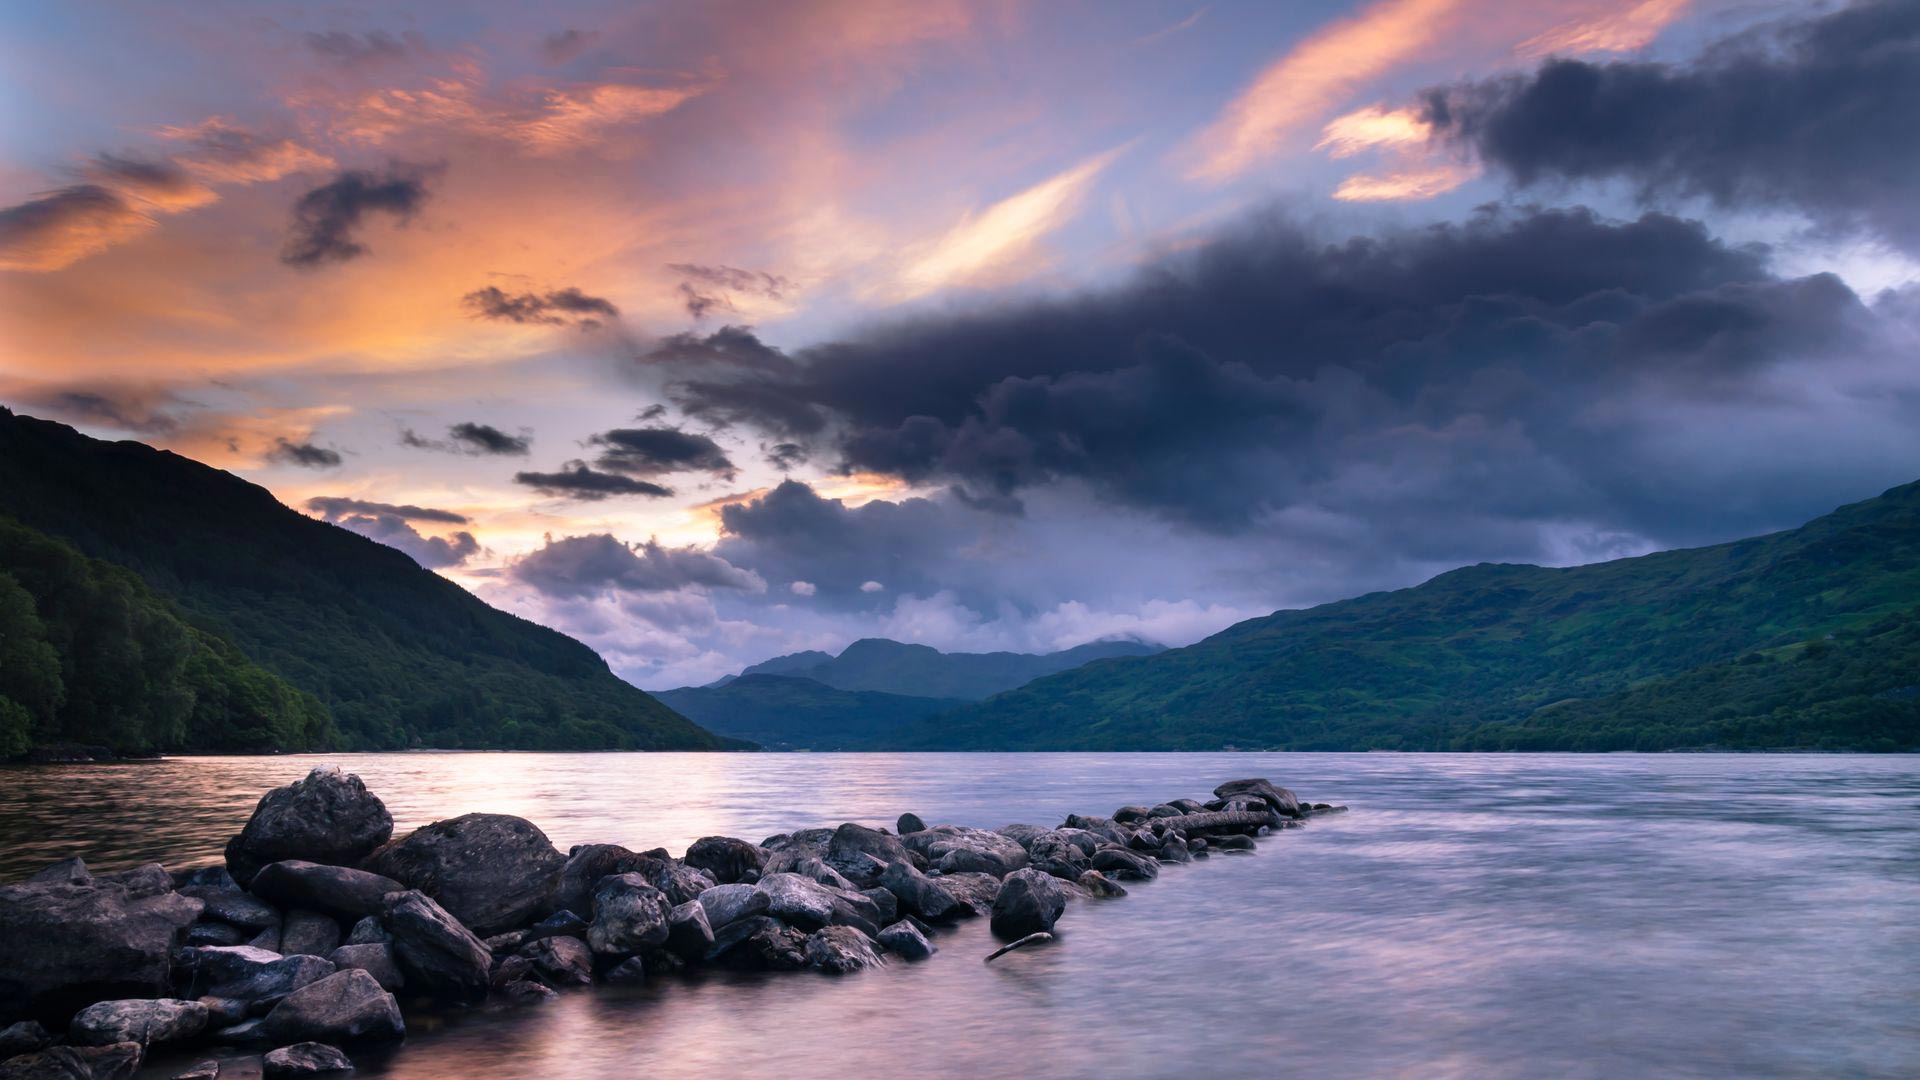 Scenery Night In Scotland Wallpapers